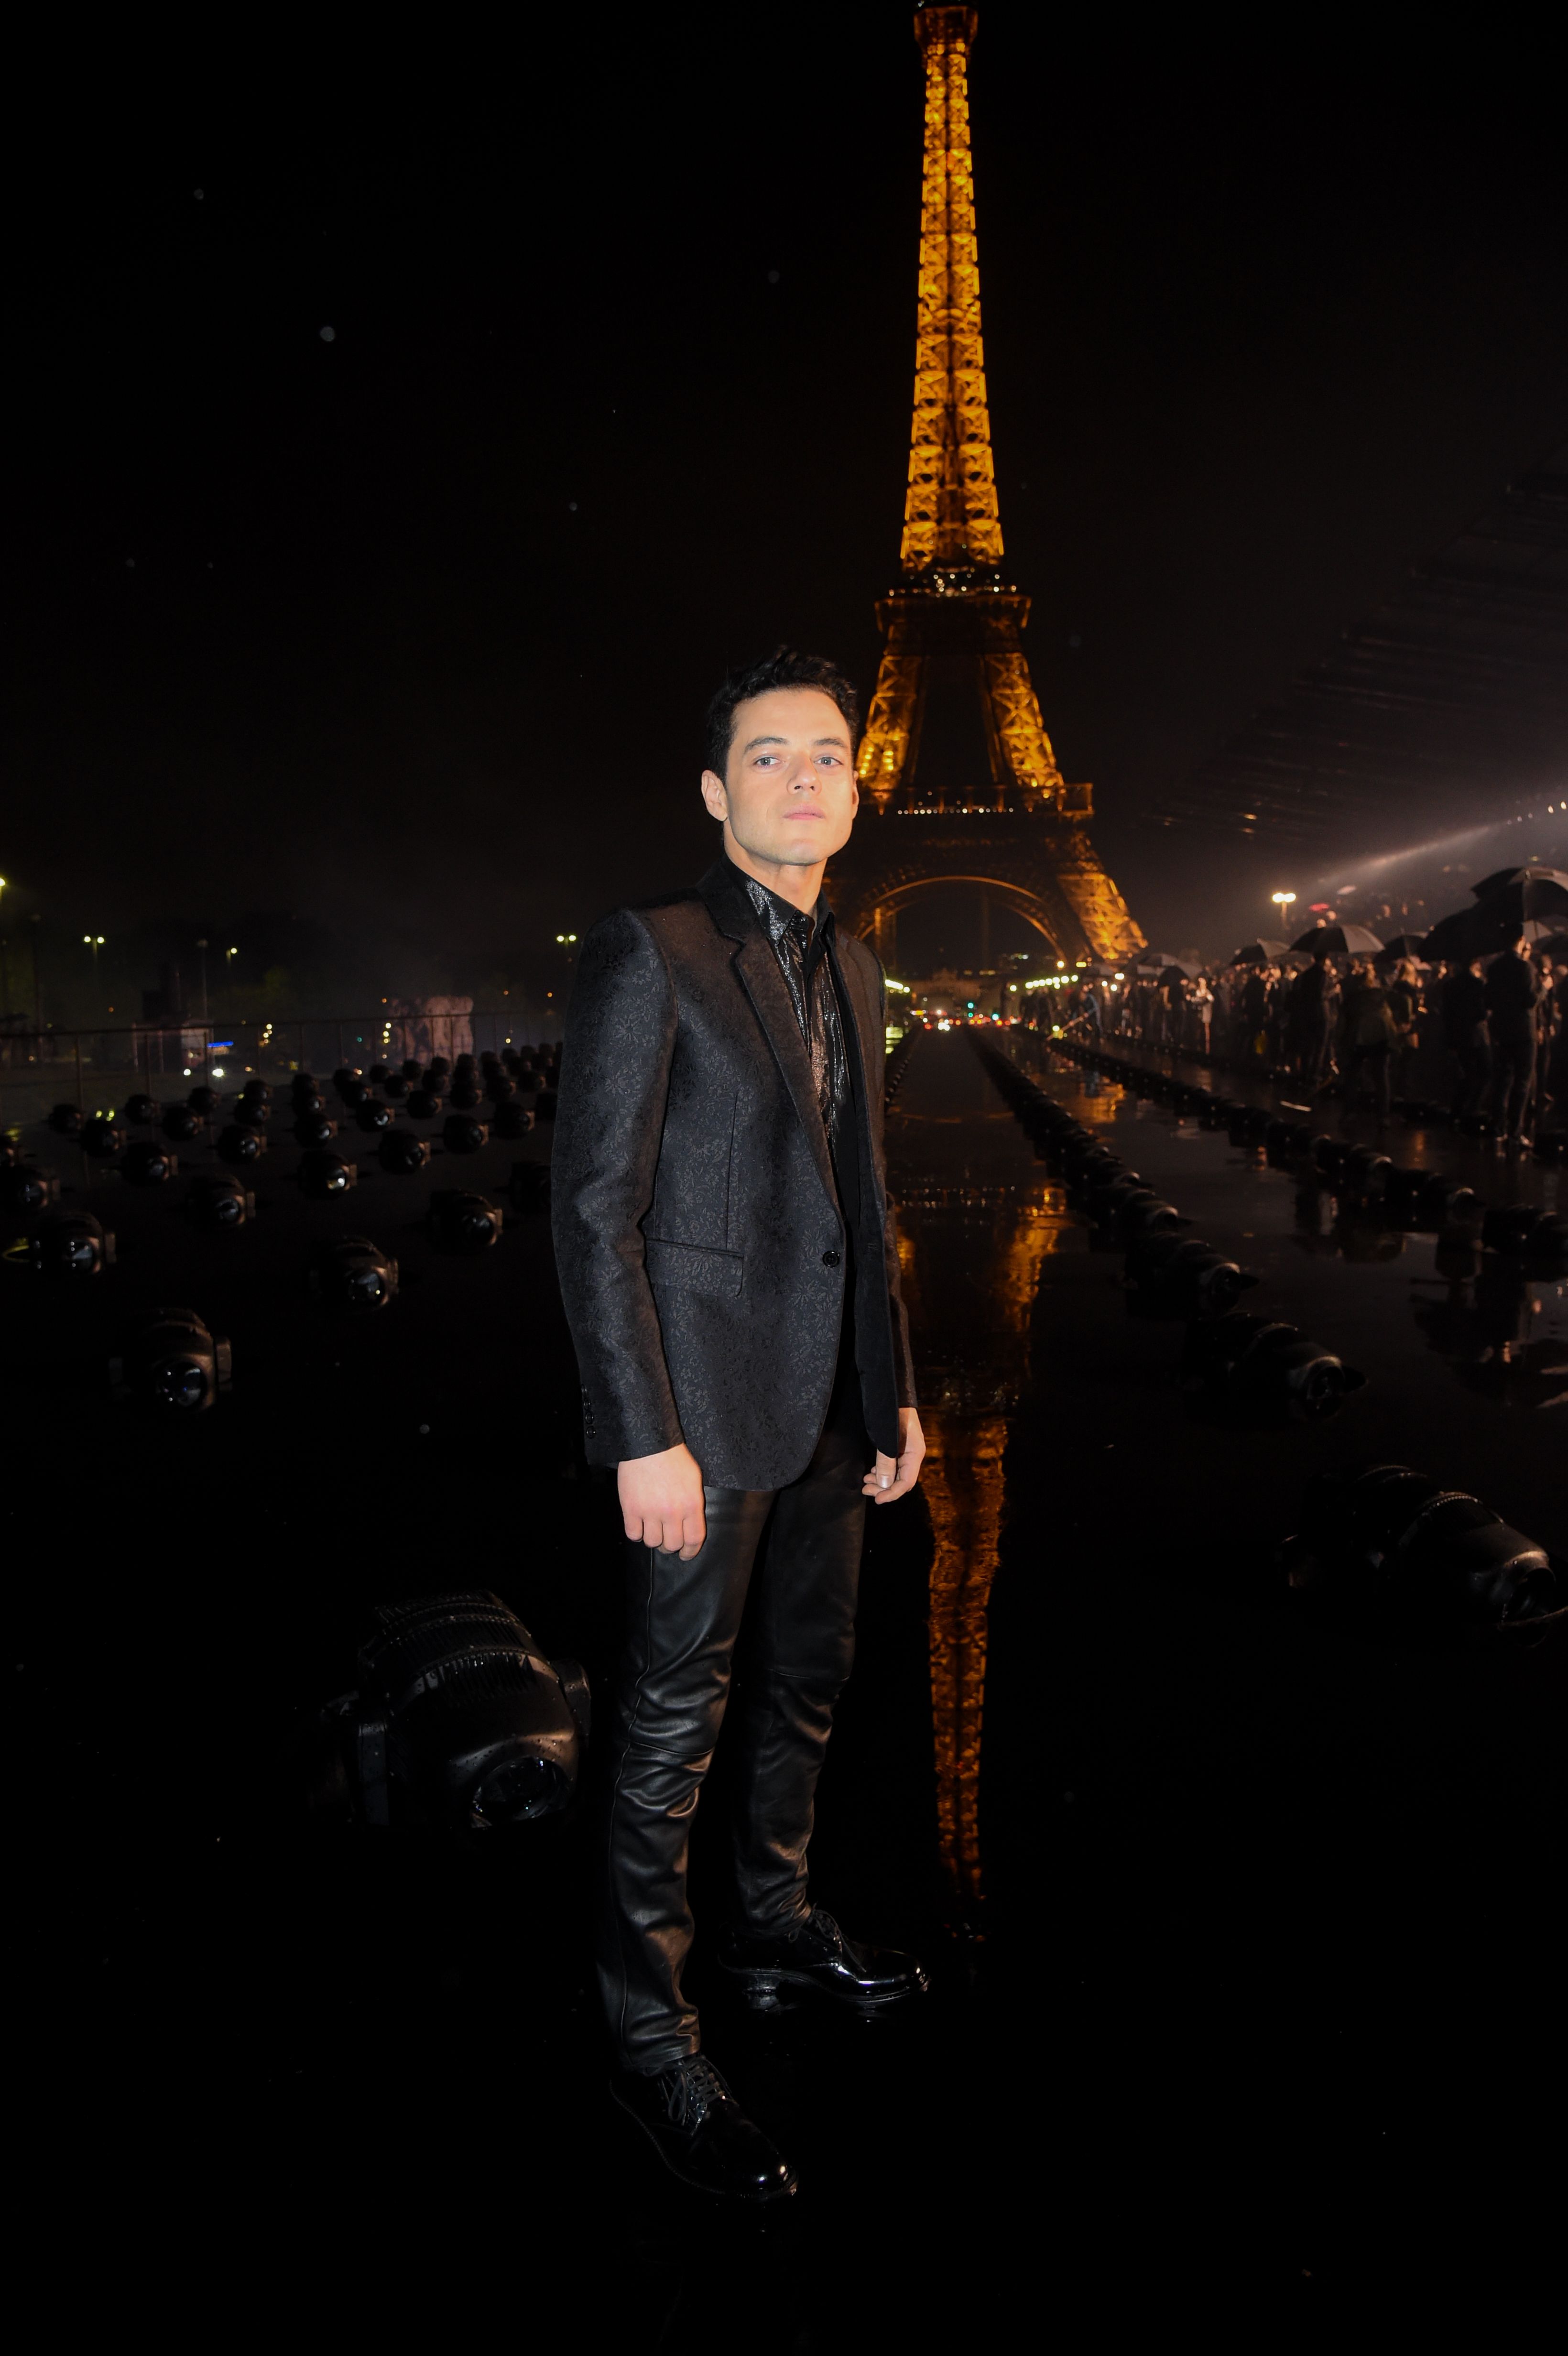 Rami Malek dons sparkly trousers for the Saint Laurent SS20 campaign